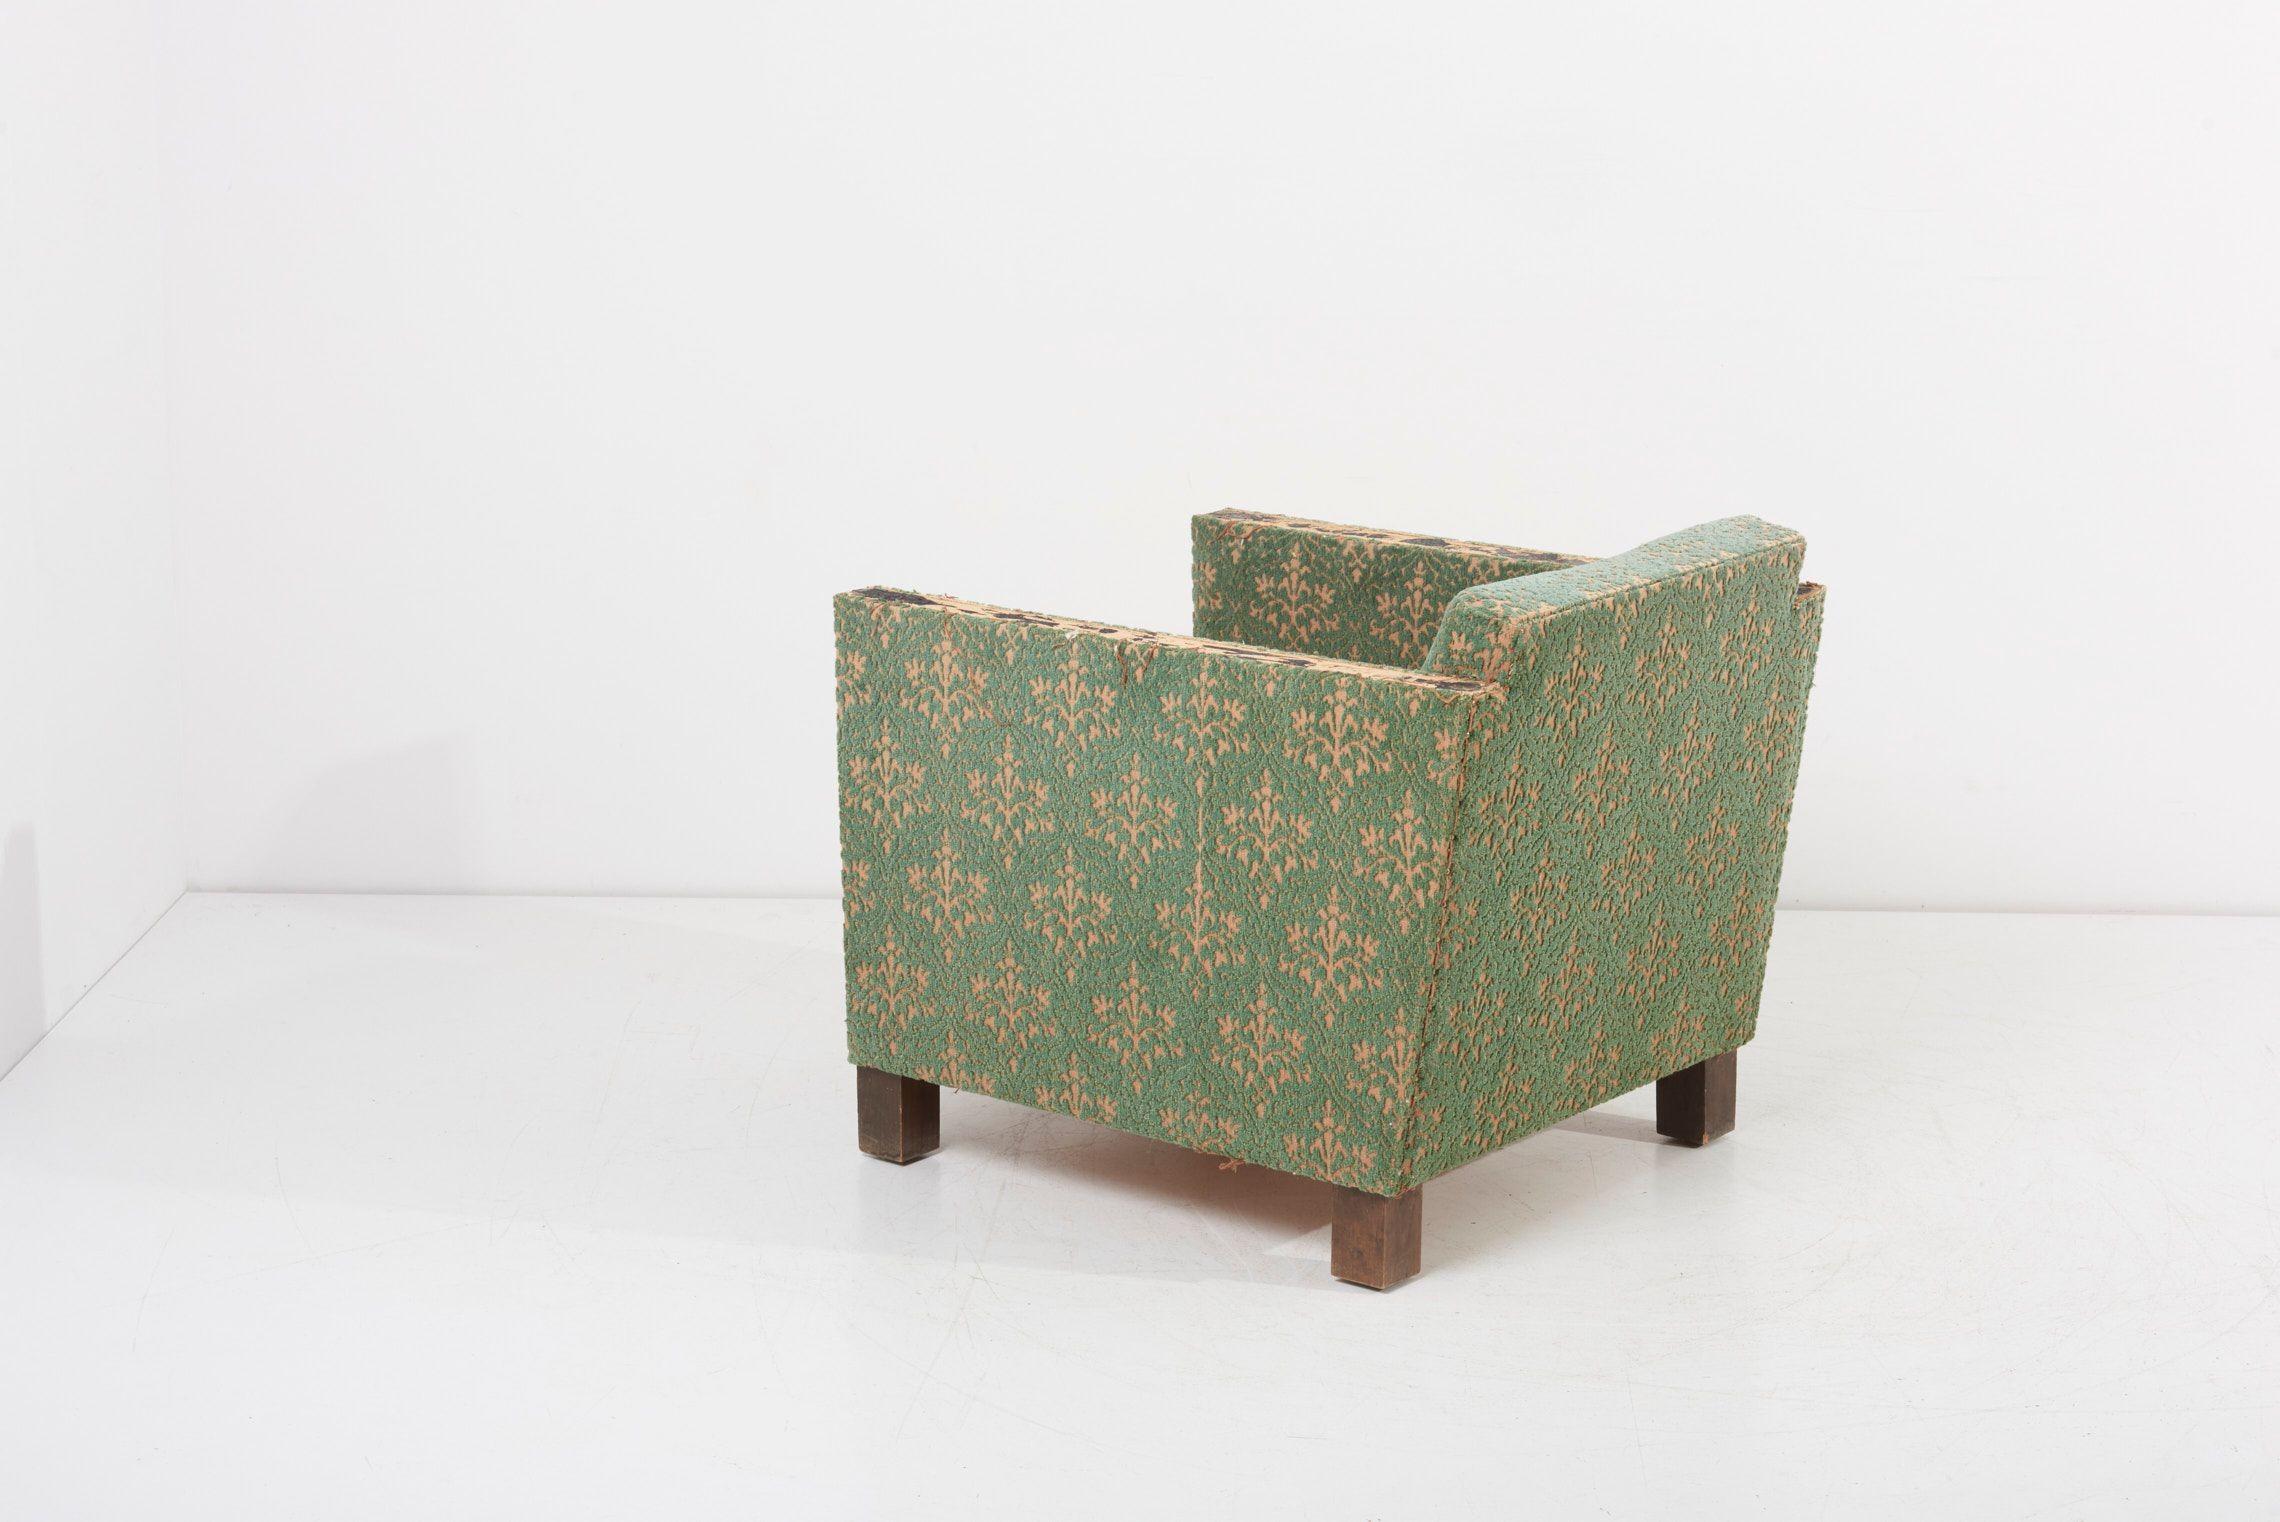 Pair of 1930s green Björn Trägårdh Lounge Chairs with ornaments, Sweden For Sale 3